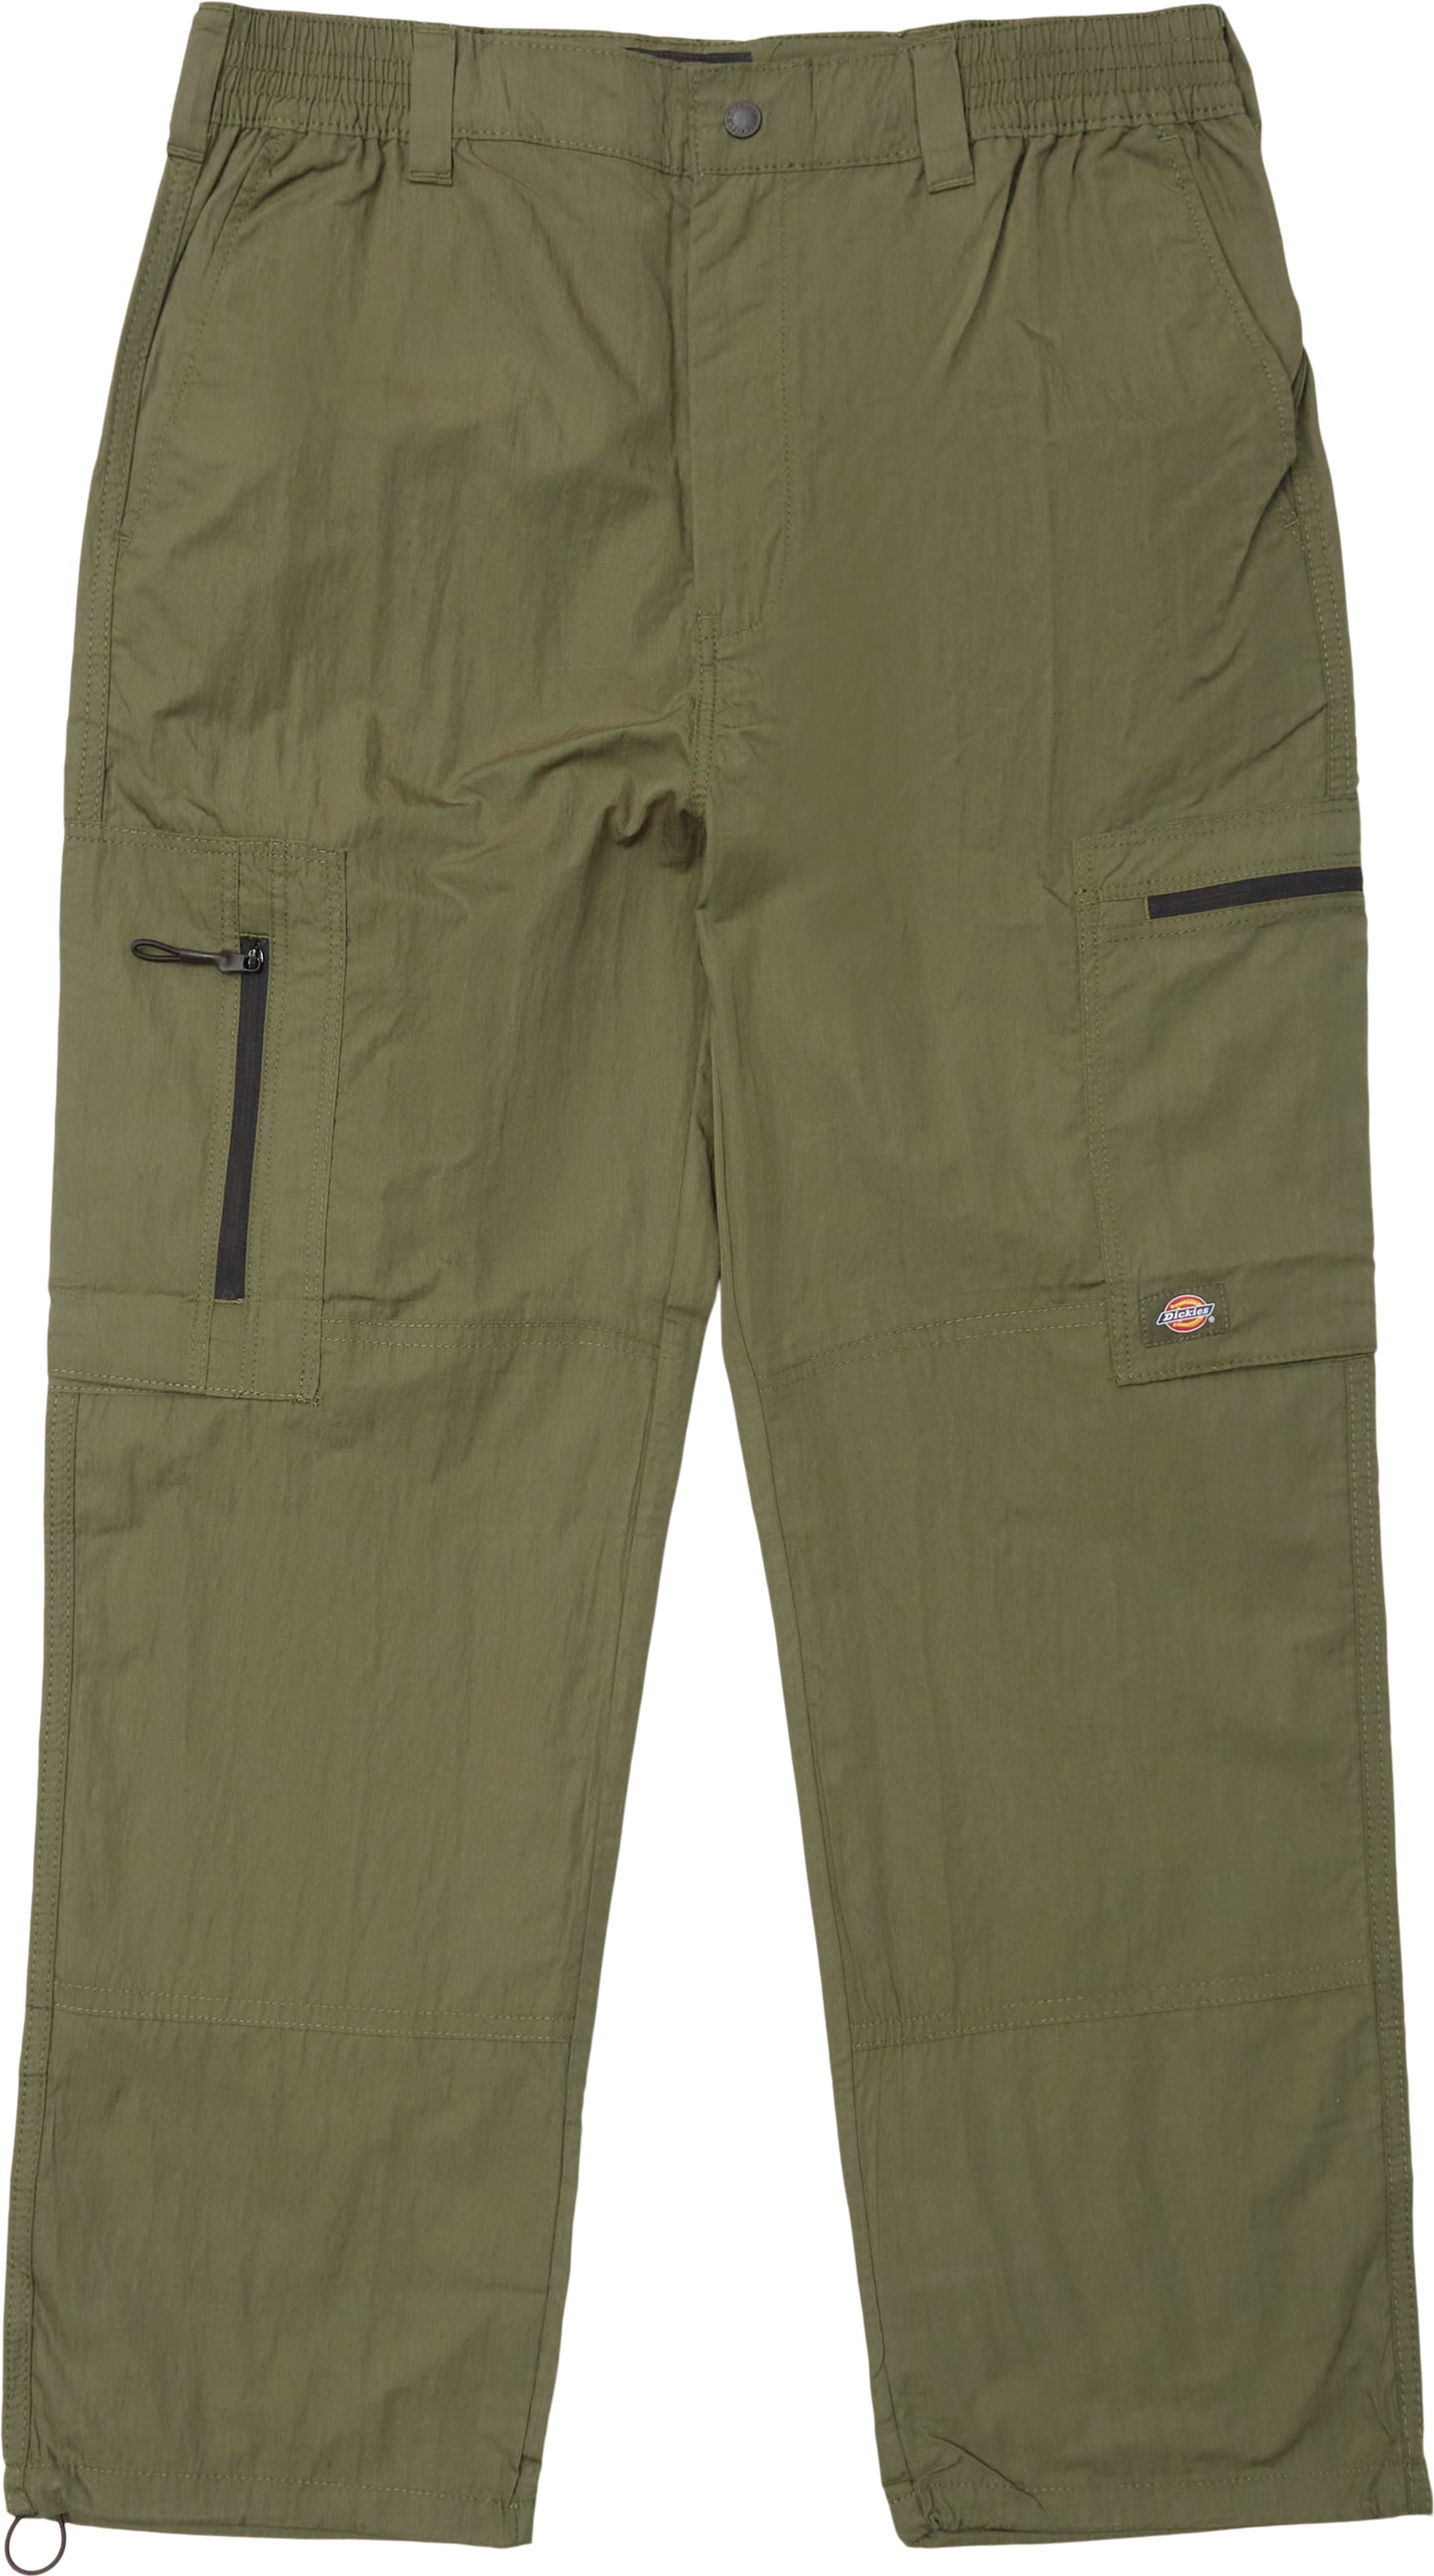 Glacier Pants - Trousers - Loose fit - Green